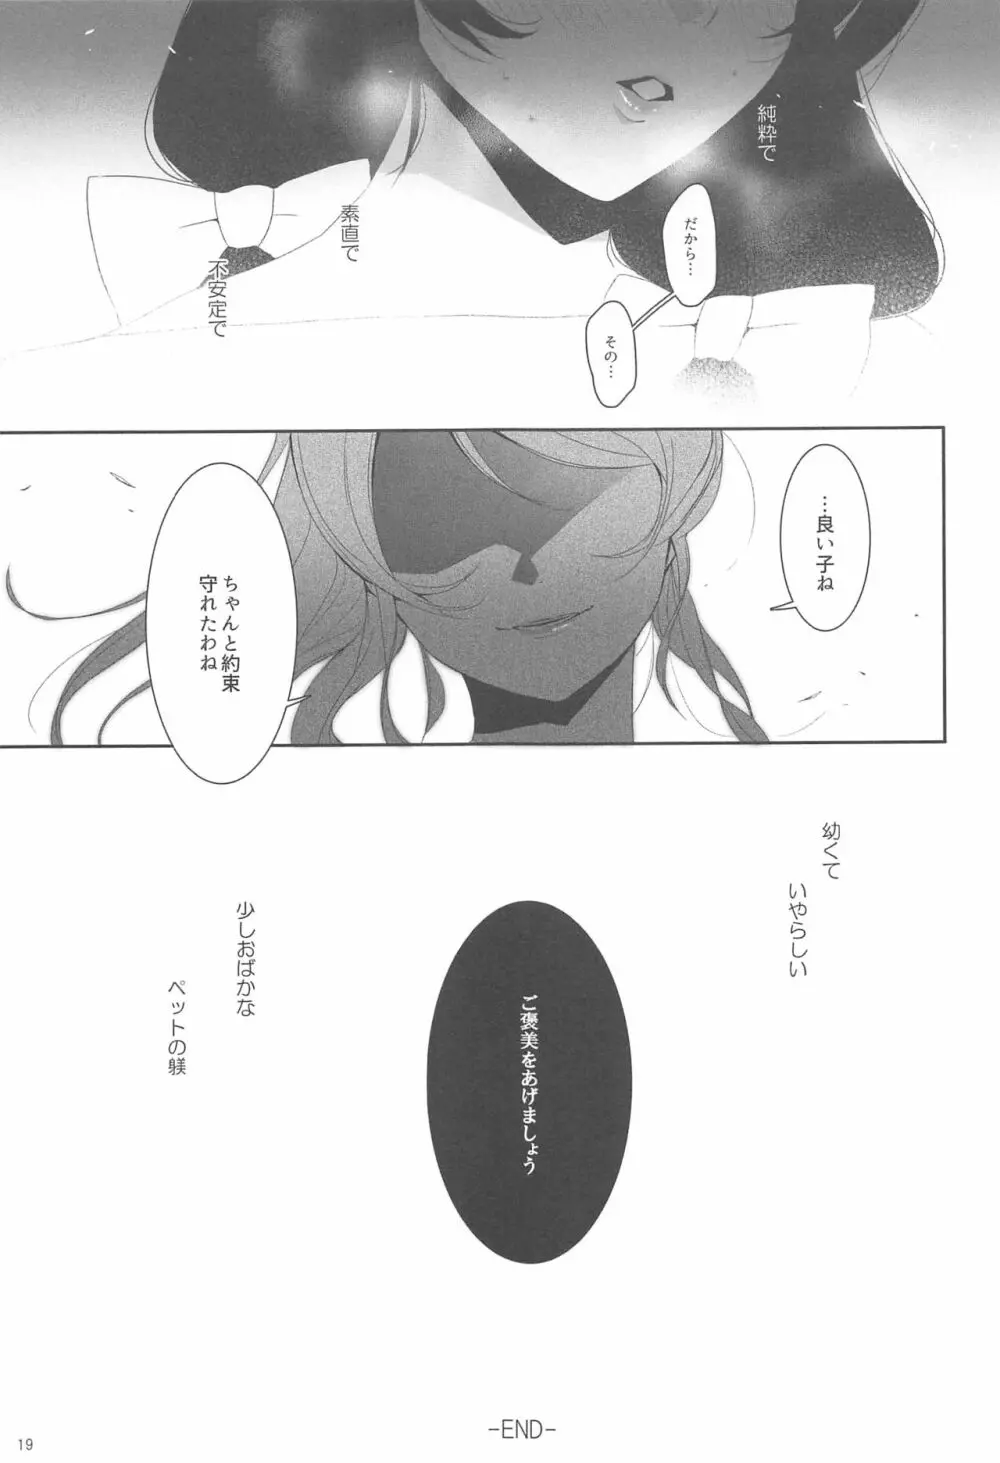 Re:デーデッデー!!!!!!!! - page20